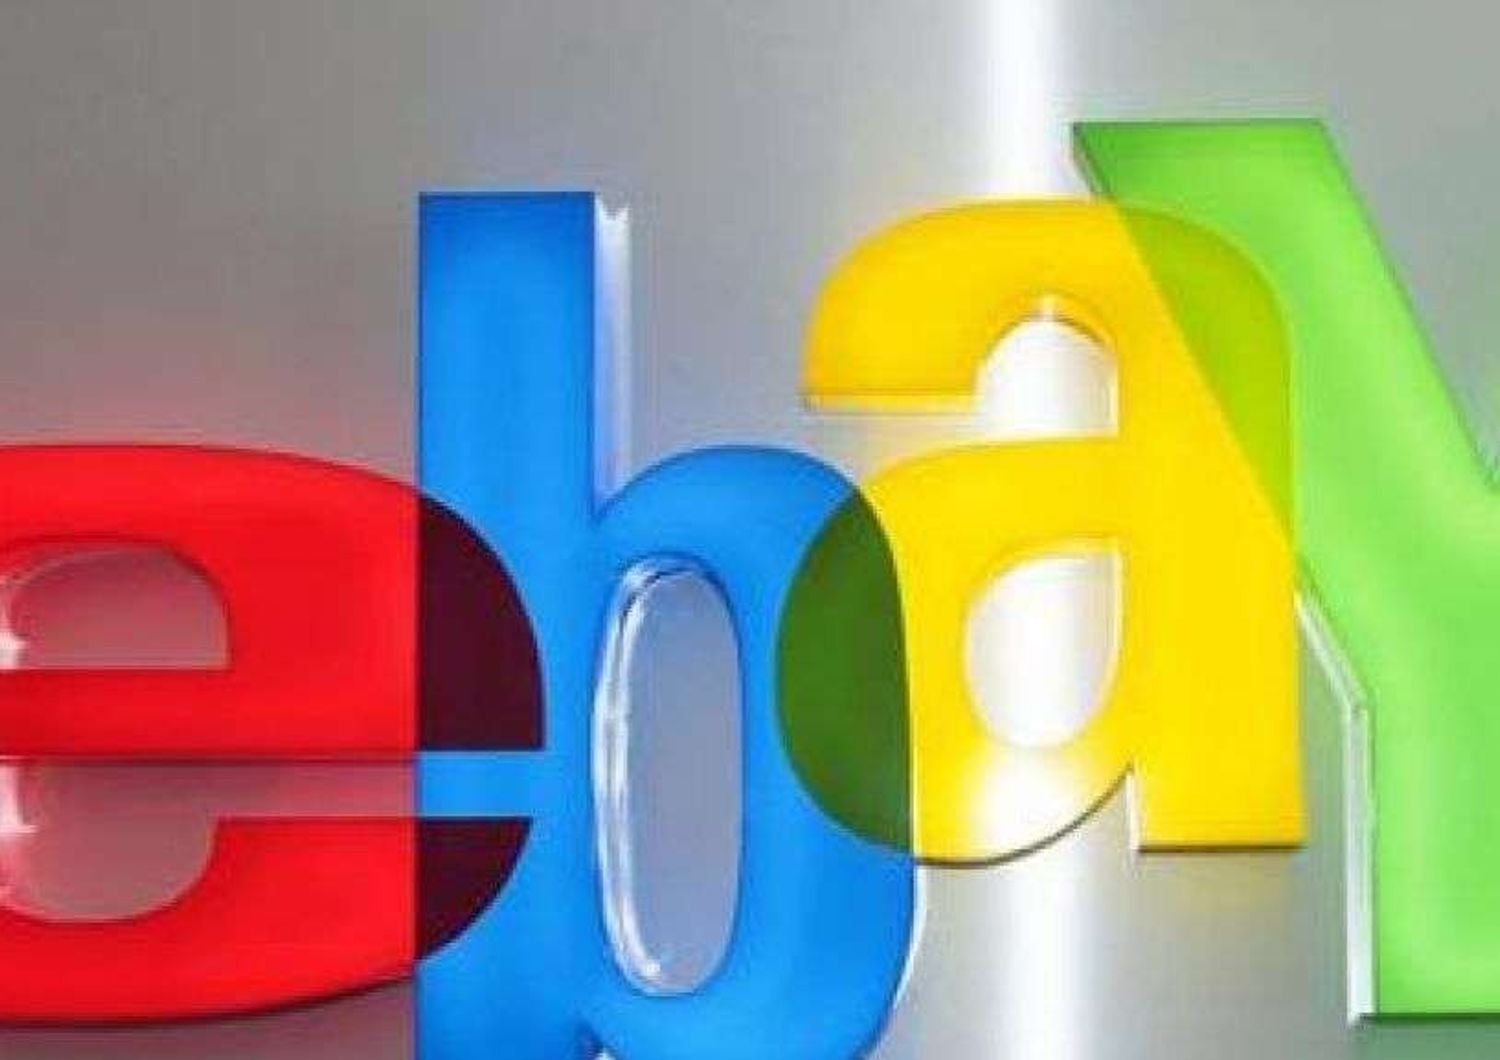 PalPal to separate from eBay next year